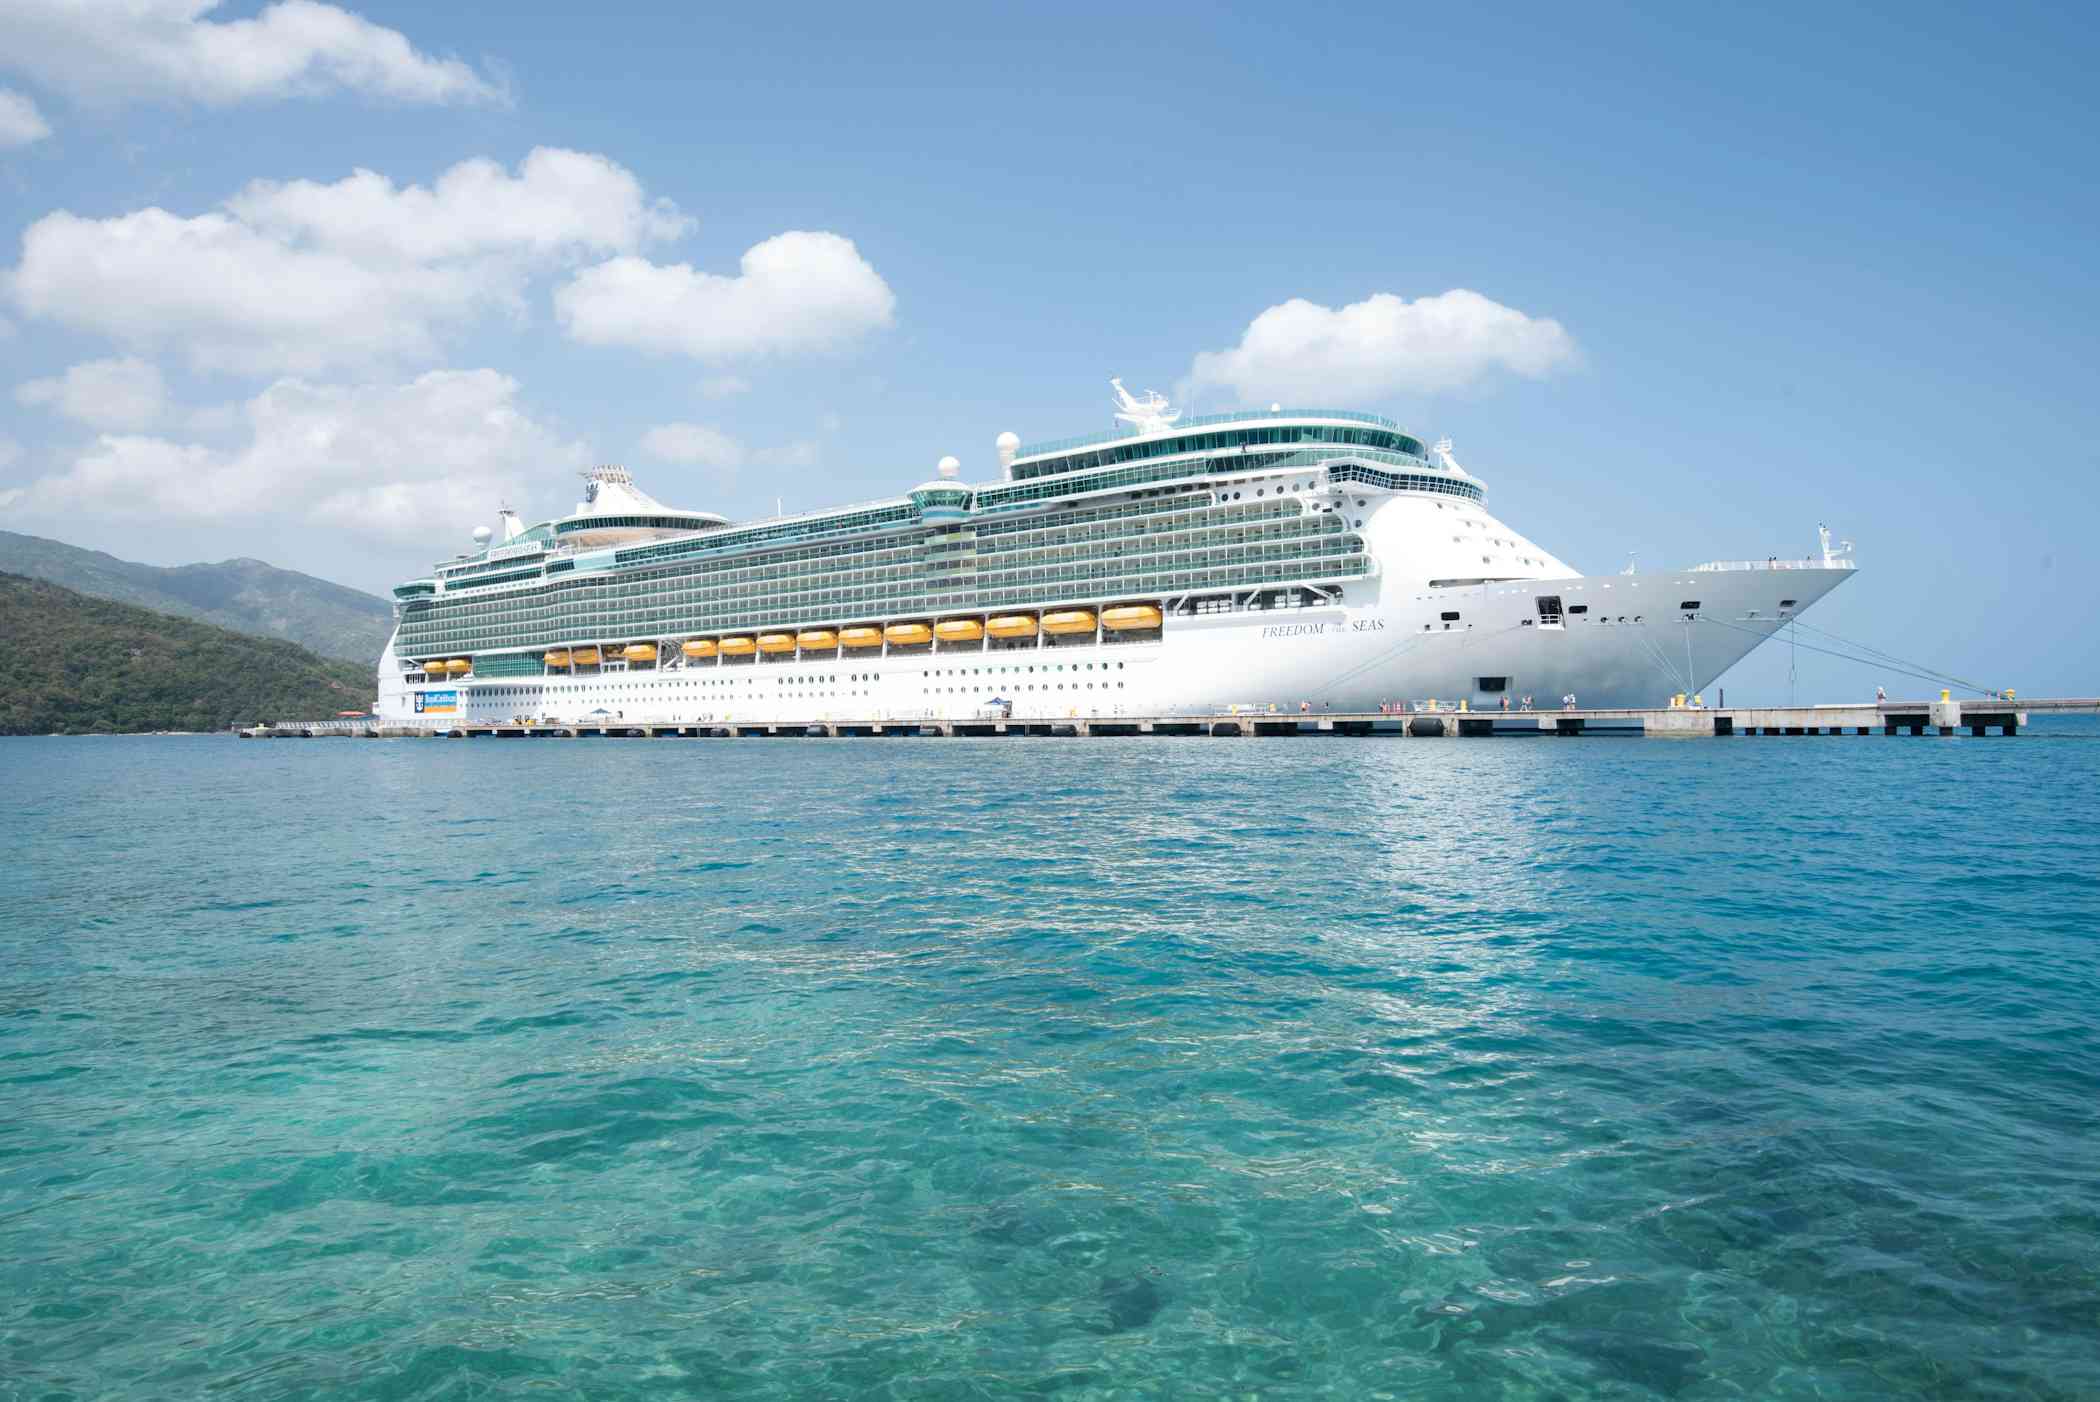 Royal Caribbean cruise deals from the UK